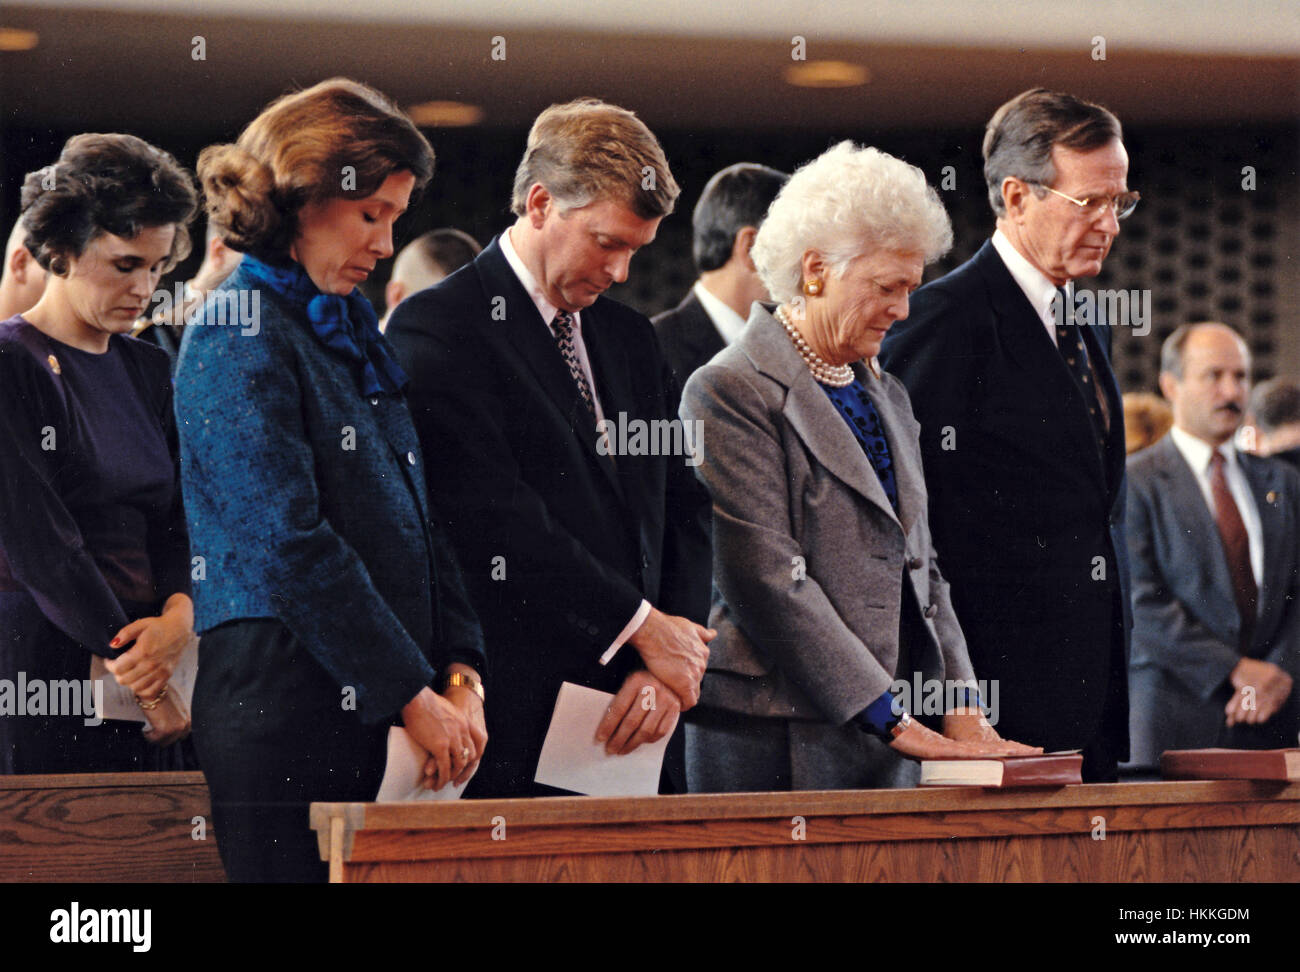 United States President George H.W. Bush, and first lady Barbara Bush, second right, attend a church service at Fort Myer with US Vice President Dan Quayle, center, and Mrs. Marilyn Quayle, center right, on January 17, 1991. Pictured at right is President and Mrs. Bush's daughter Dorothy. Mandatory Credit: David Valdez/White House via CNP - NO WIRE SERVICE - Photo: David Valdez/Consolidated News Photos/David Valdez - White House via CNP Stock Photo